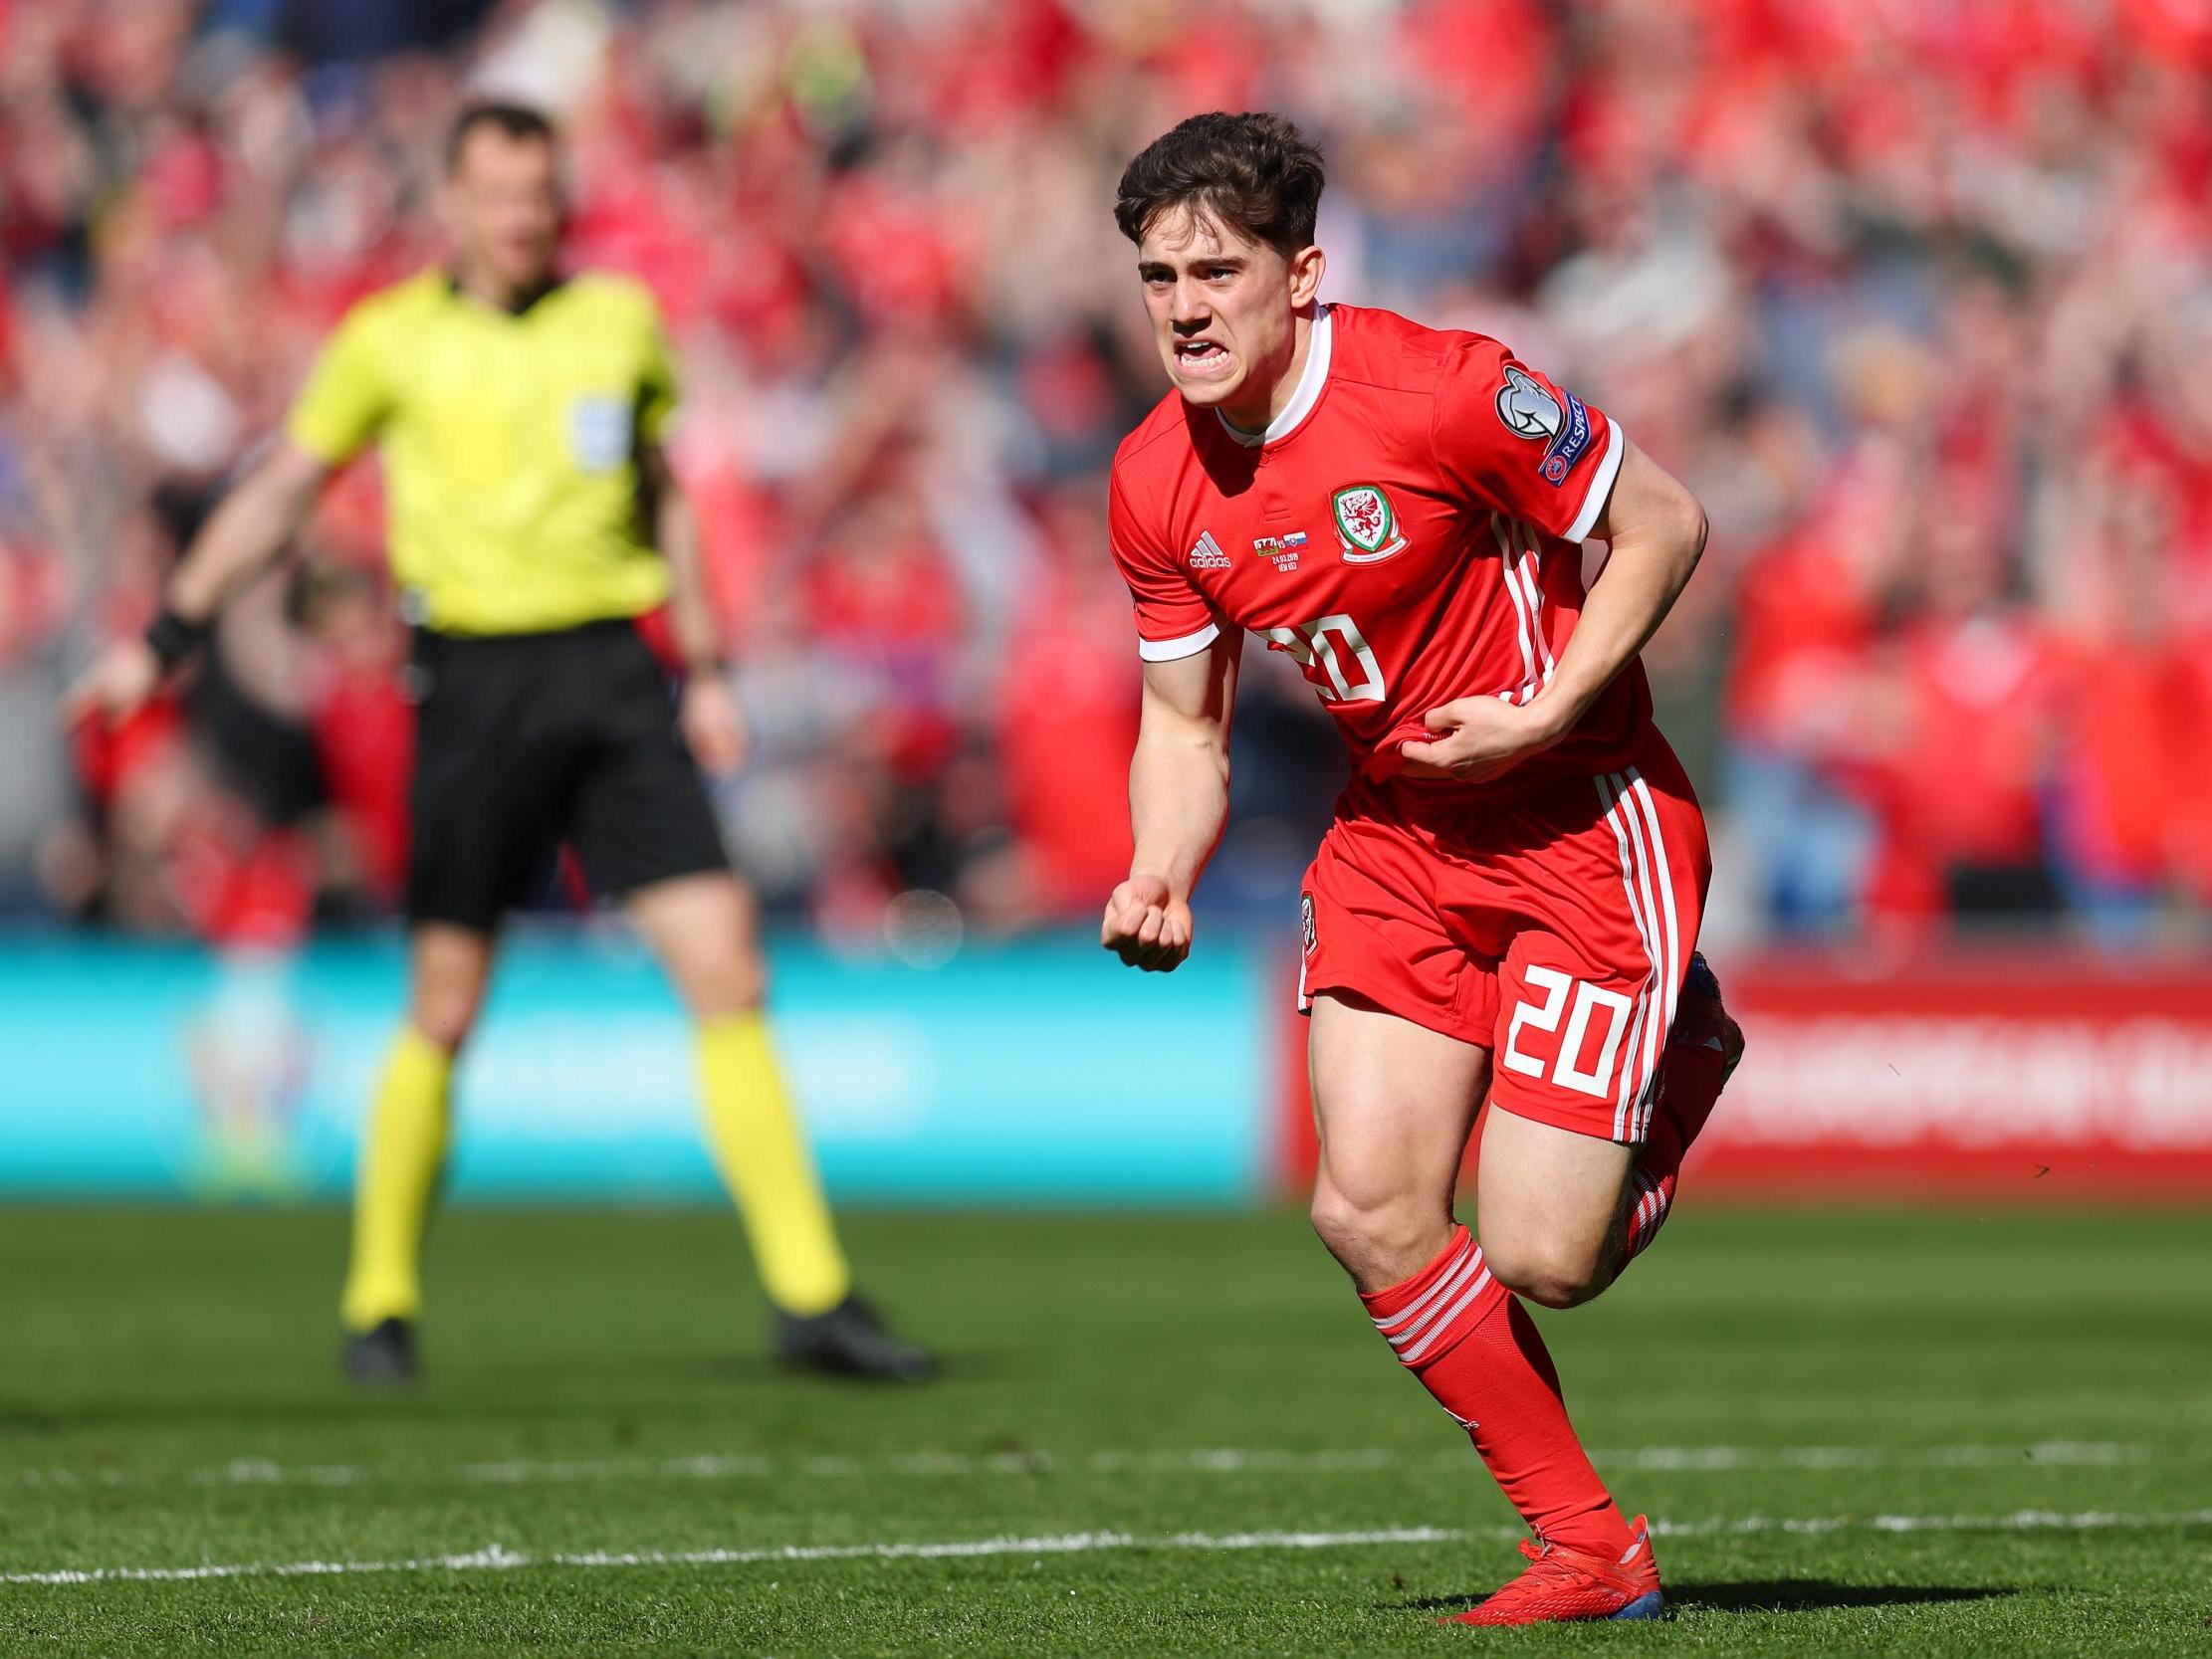 Daniel James' goal proved to be the difference